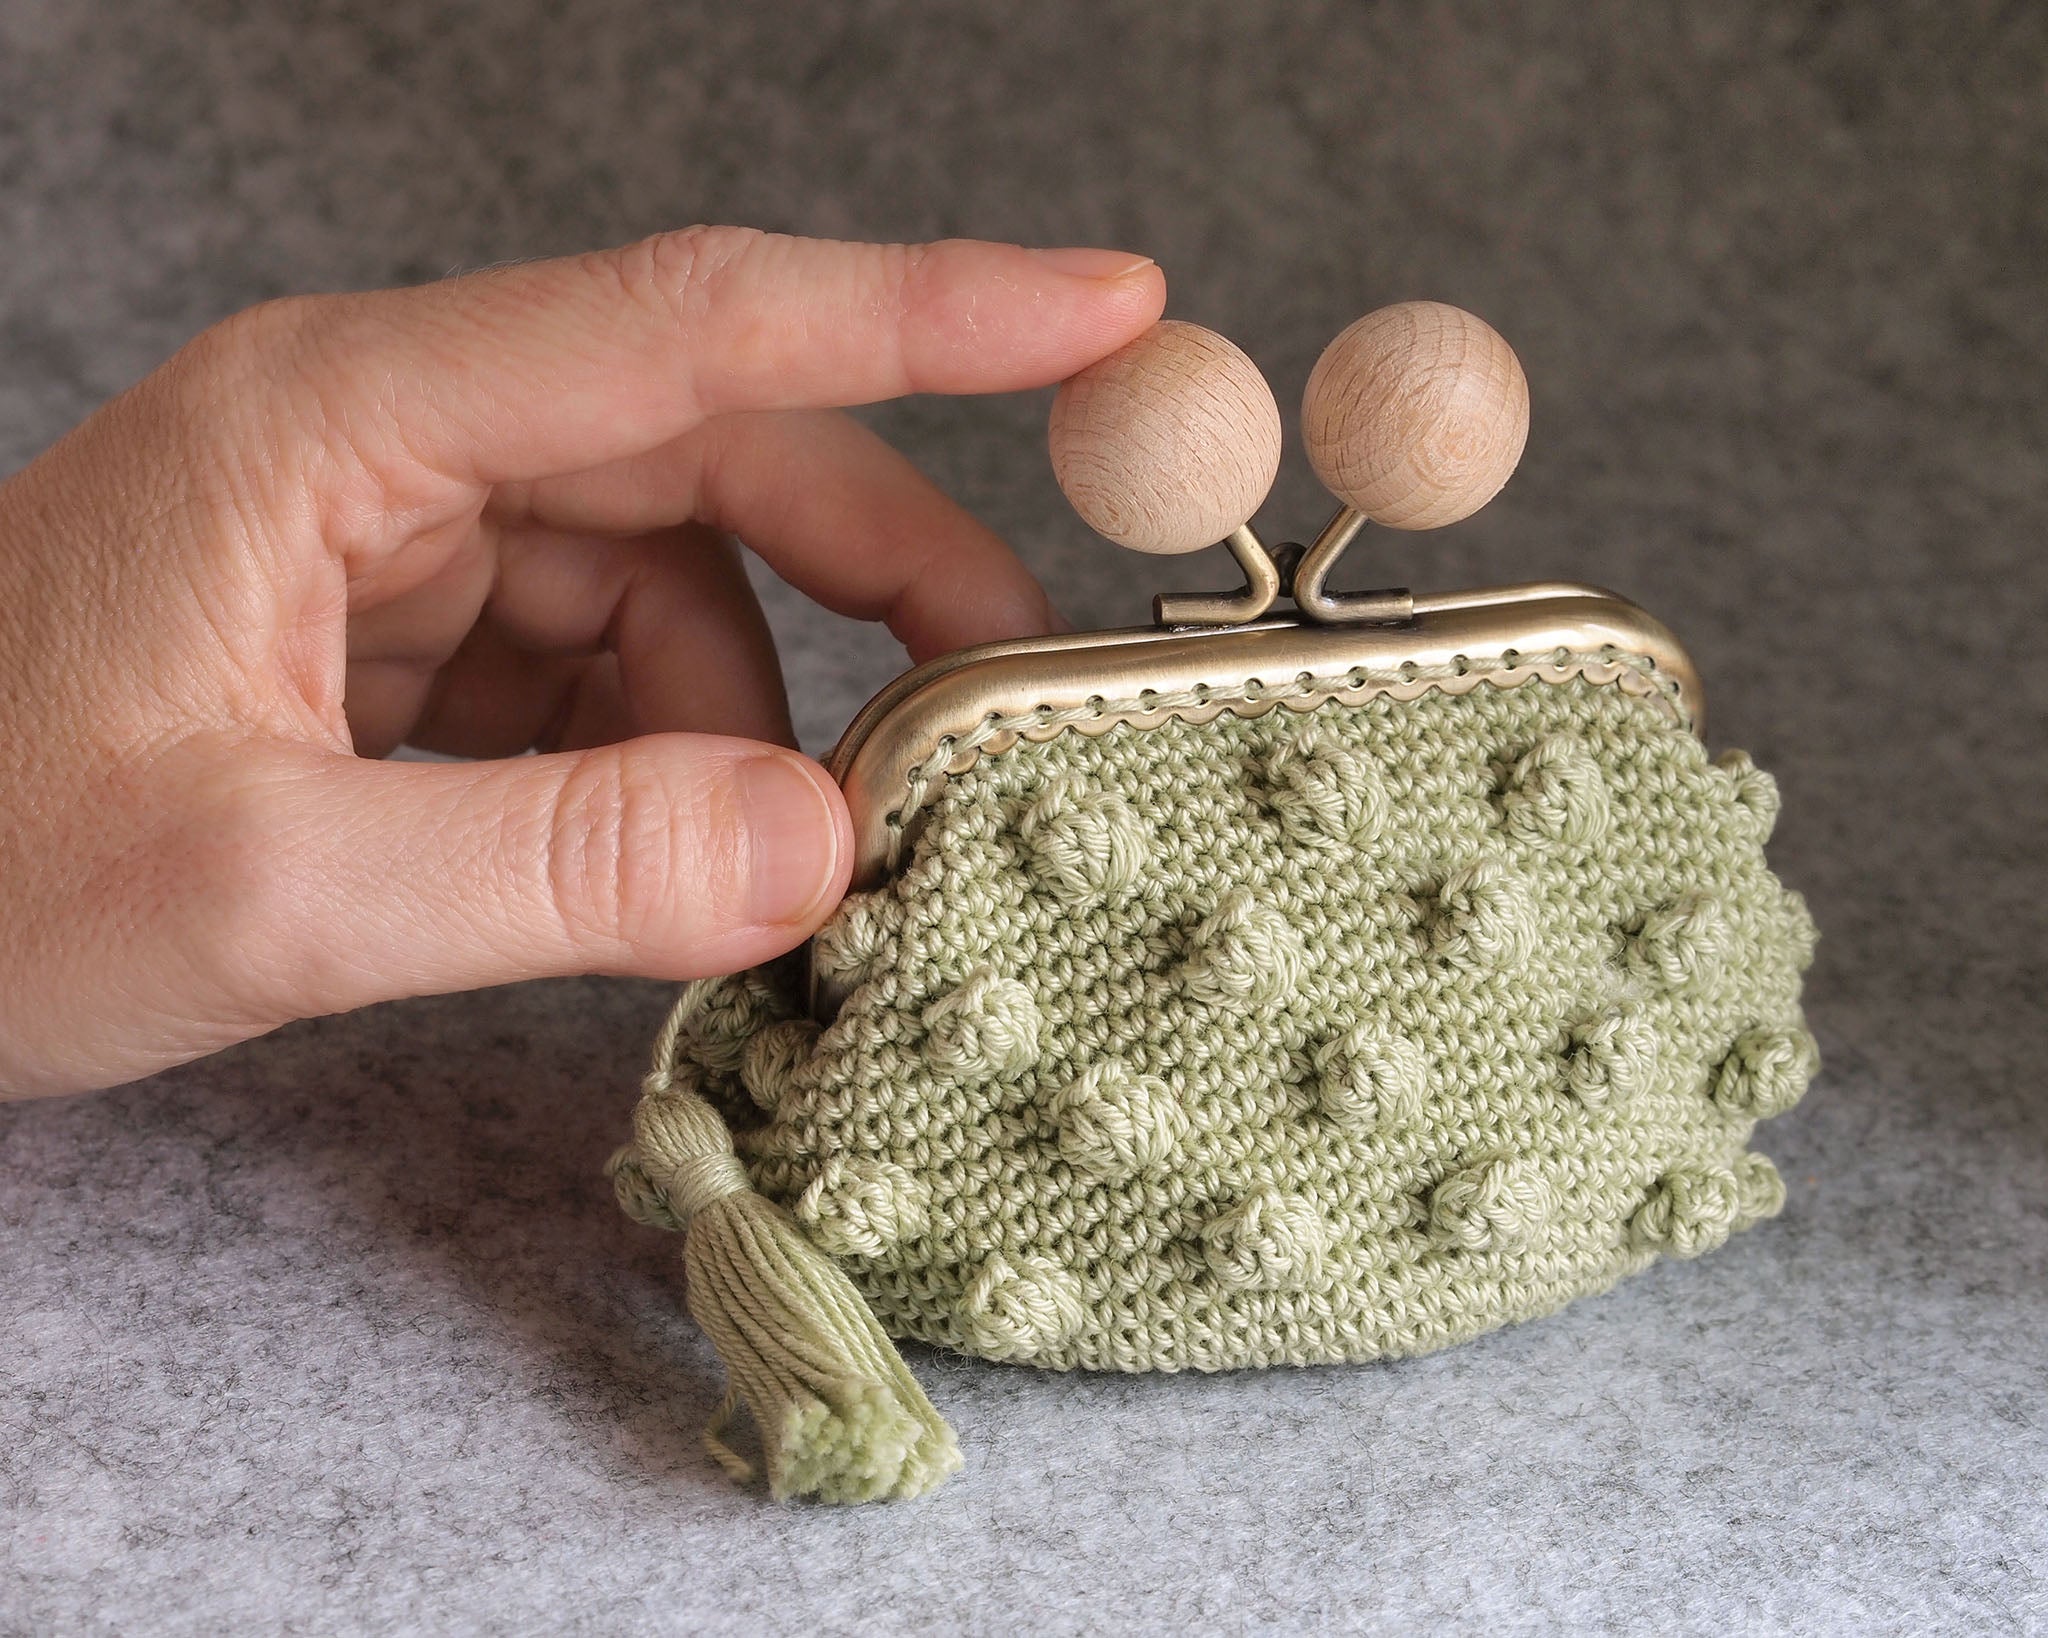 How to Crochet a Shell Coin Purse - YouTube